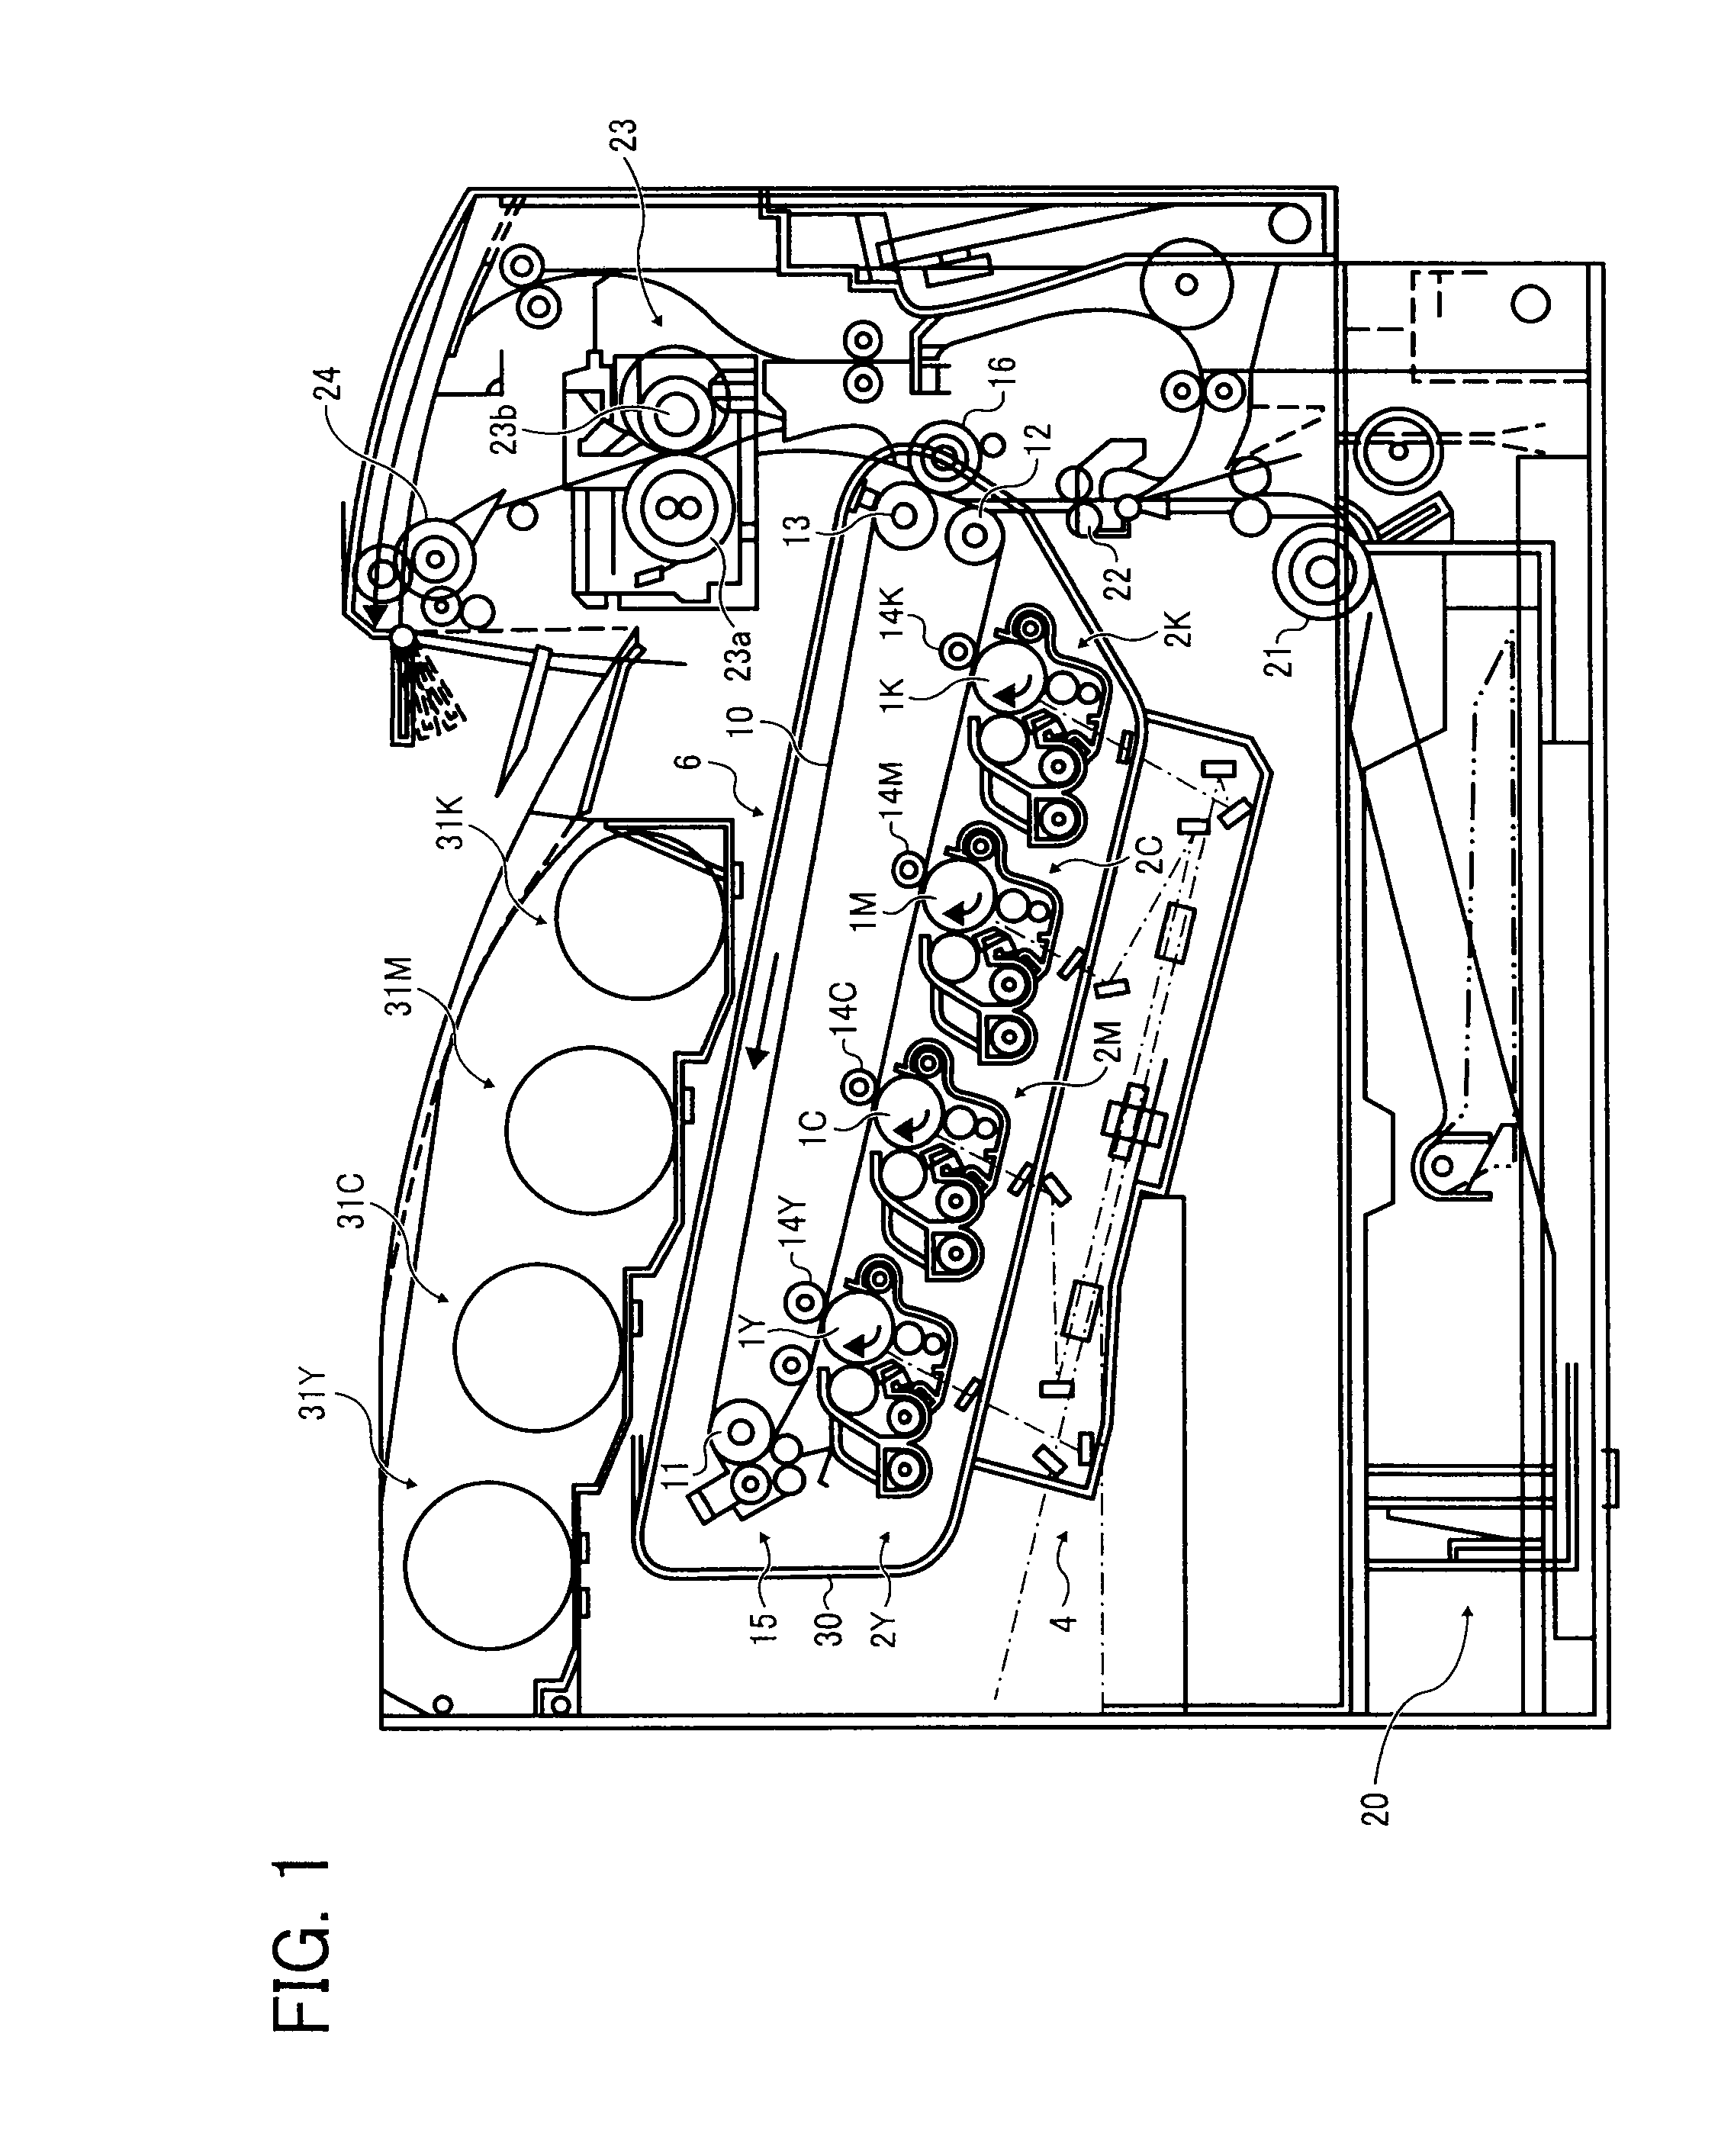 Toner, and process cartridge and image forming apparatus using the same